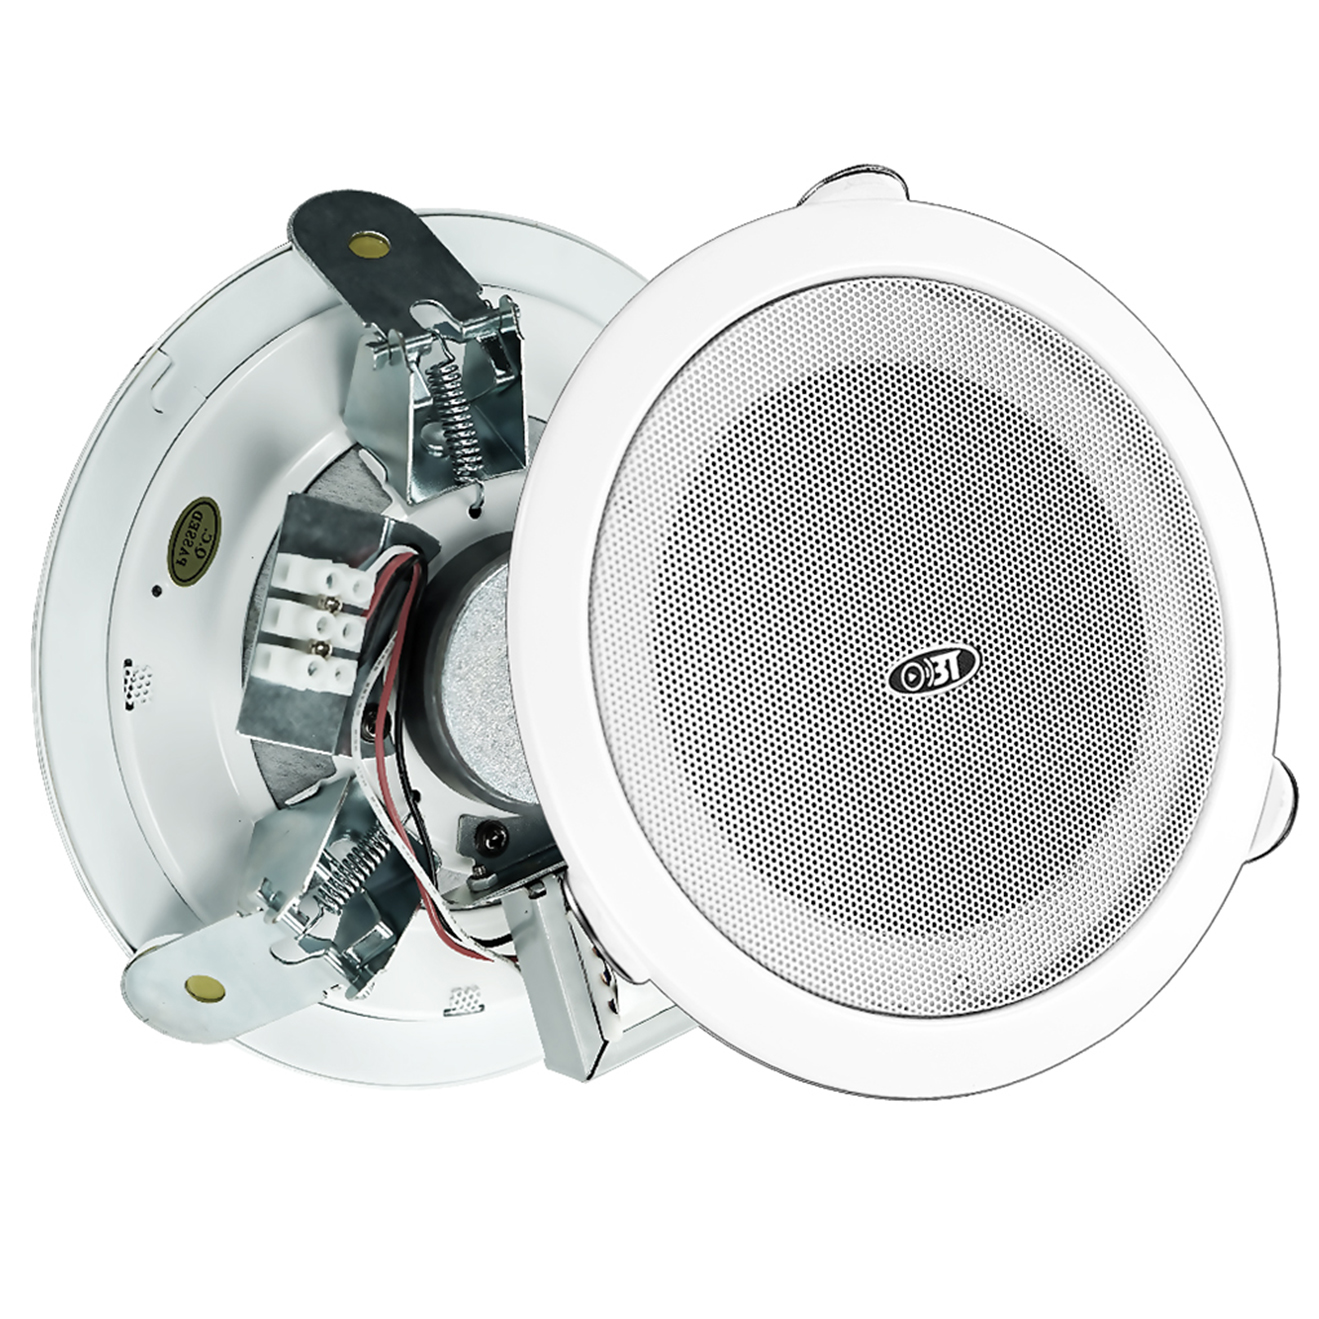 Do you know about wall fitted speaker from China manufacturer